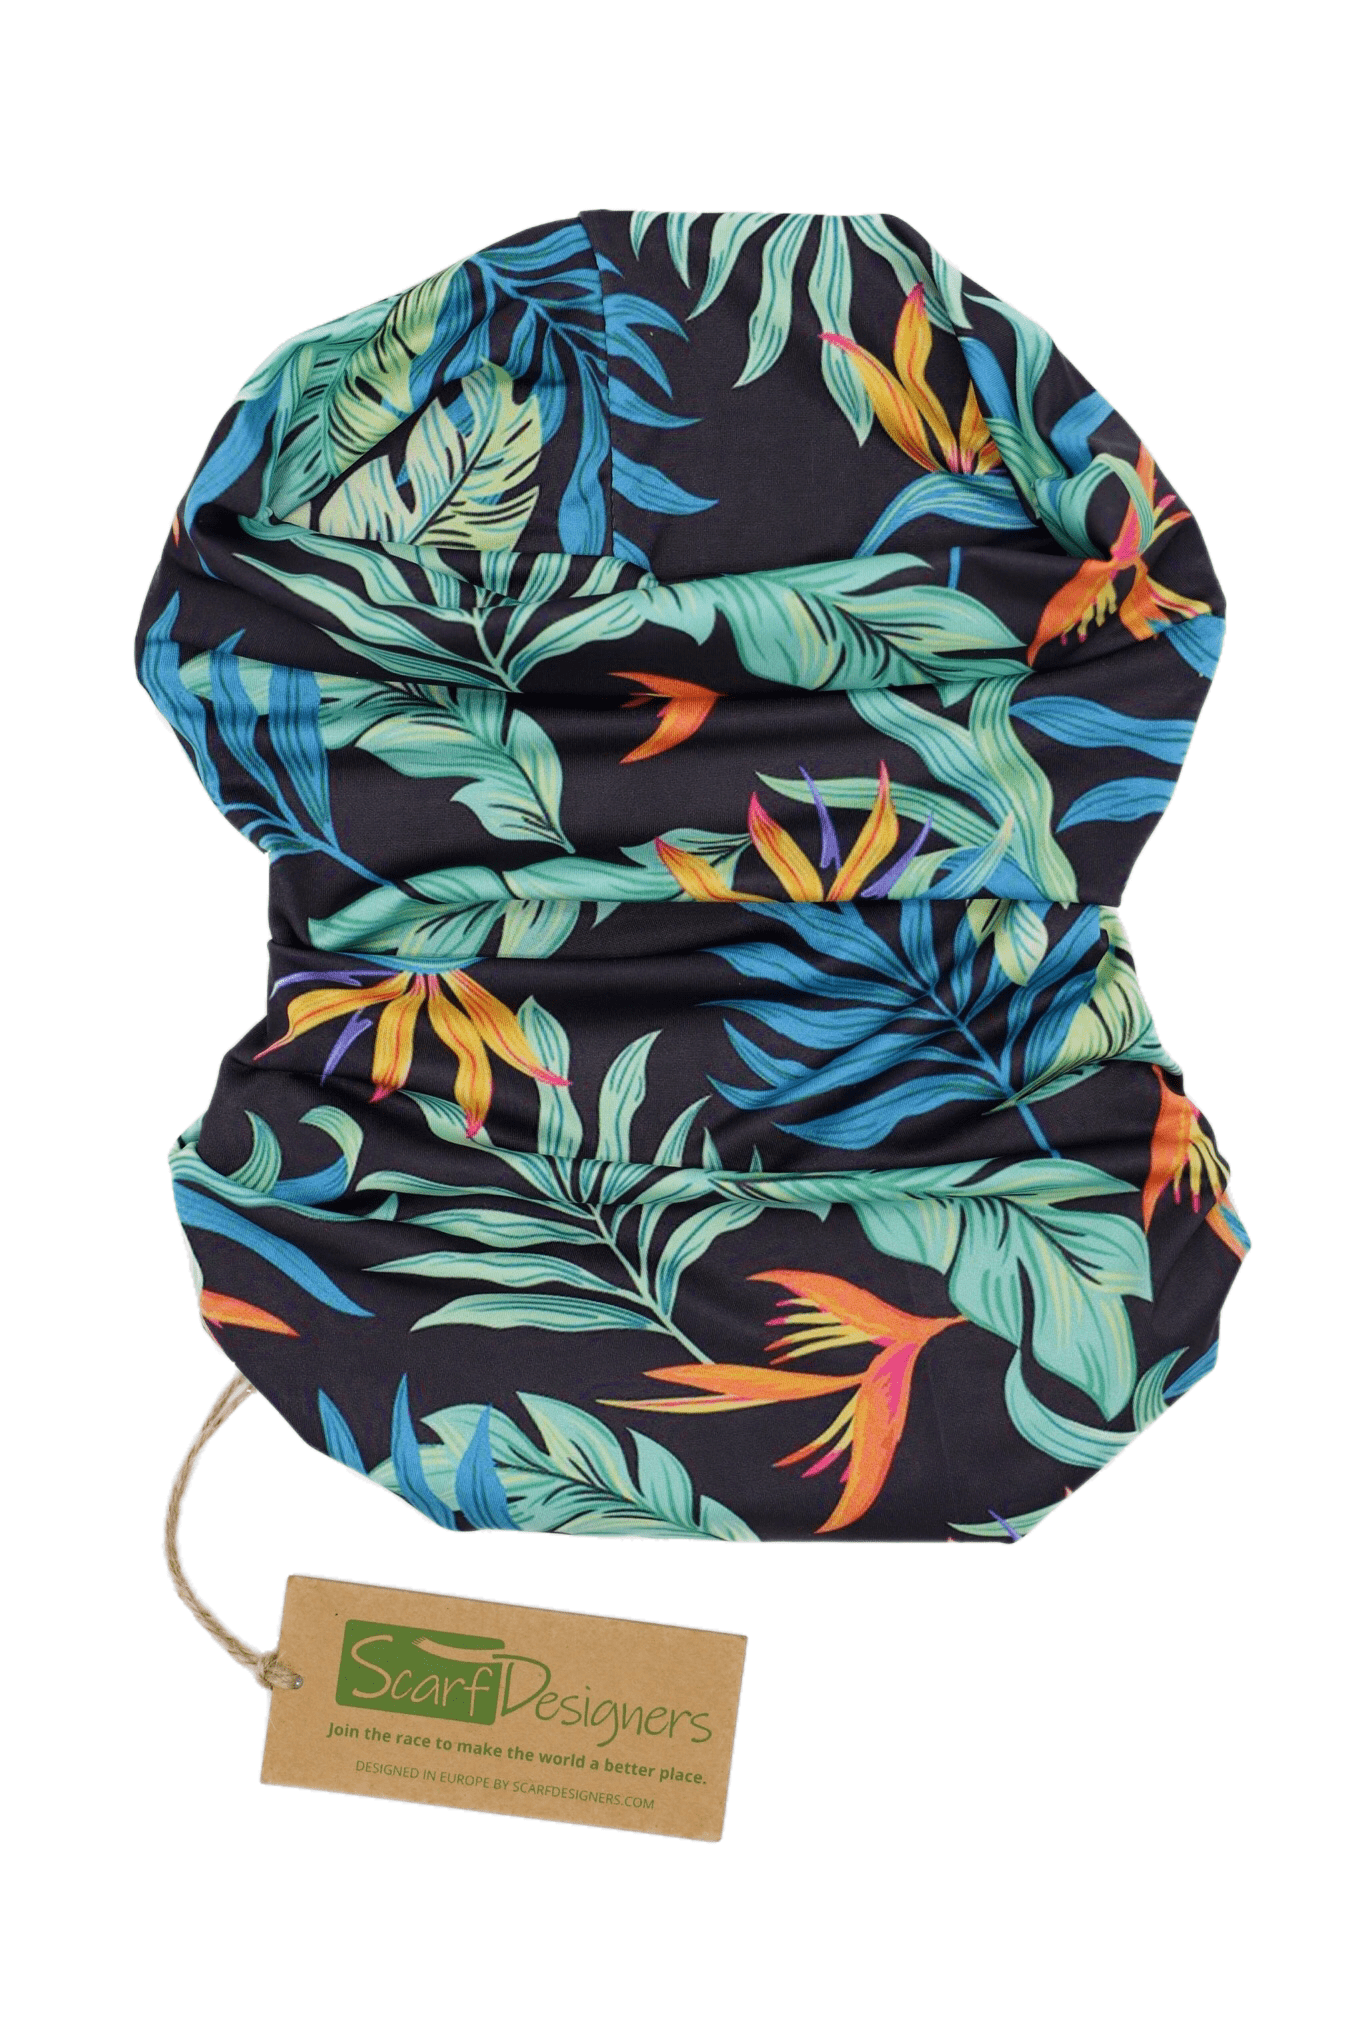 This is a multifunctional and sustainable bandana for women with exotic floral print. It is made from recycled polyester which is breathable, durable, soft to touch, easy to care and fast drying material. It makes it perfectly suitable for all kinds of sports like biking, hiking, jogging or skiing. This is a versatile bandana that can be used as a scarf, face mask, bandana or headband and it is also known as tube scarf, neck gaiter or face mask. It is a vegan product certified by PETA.